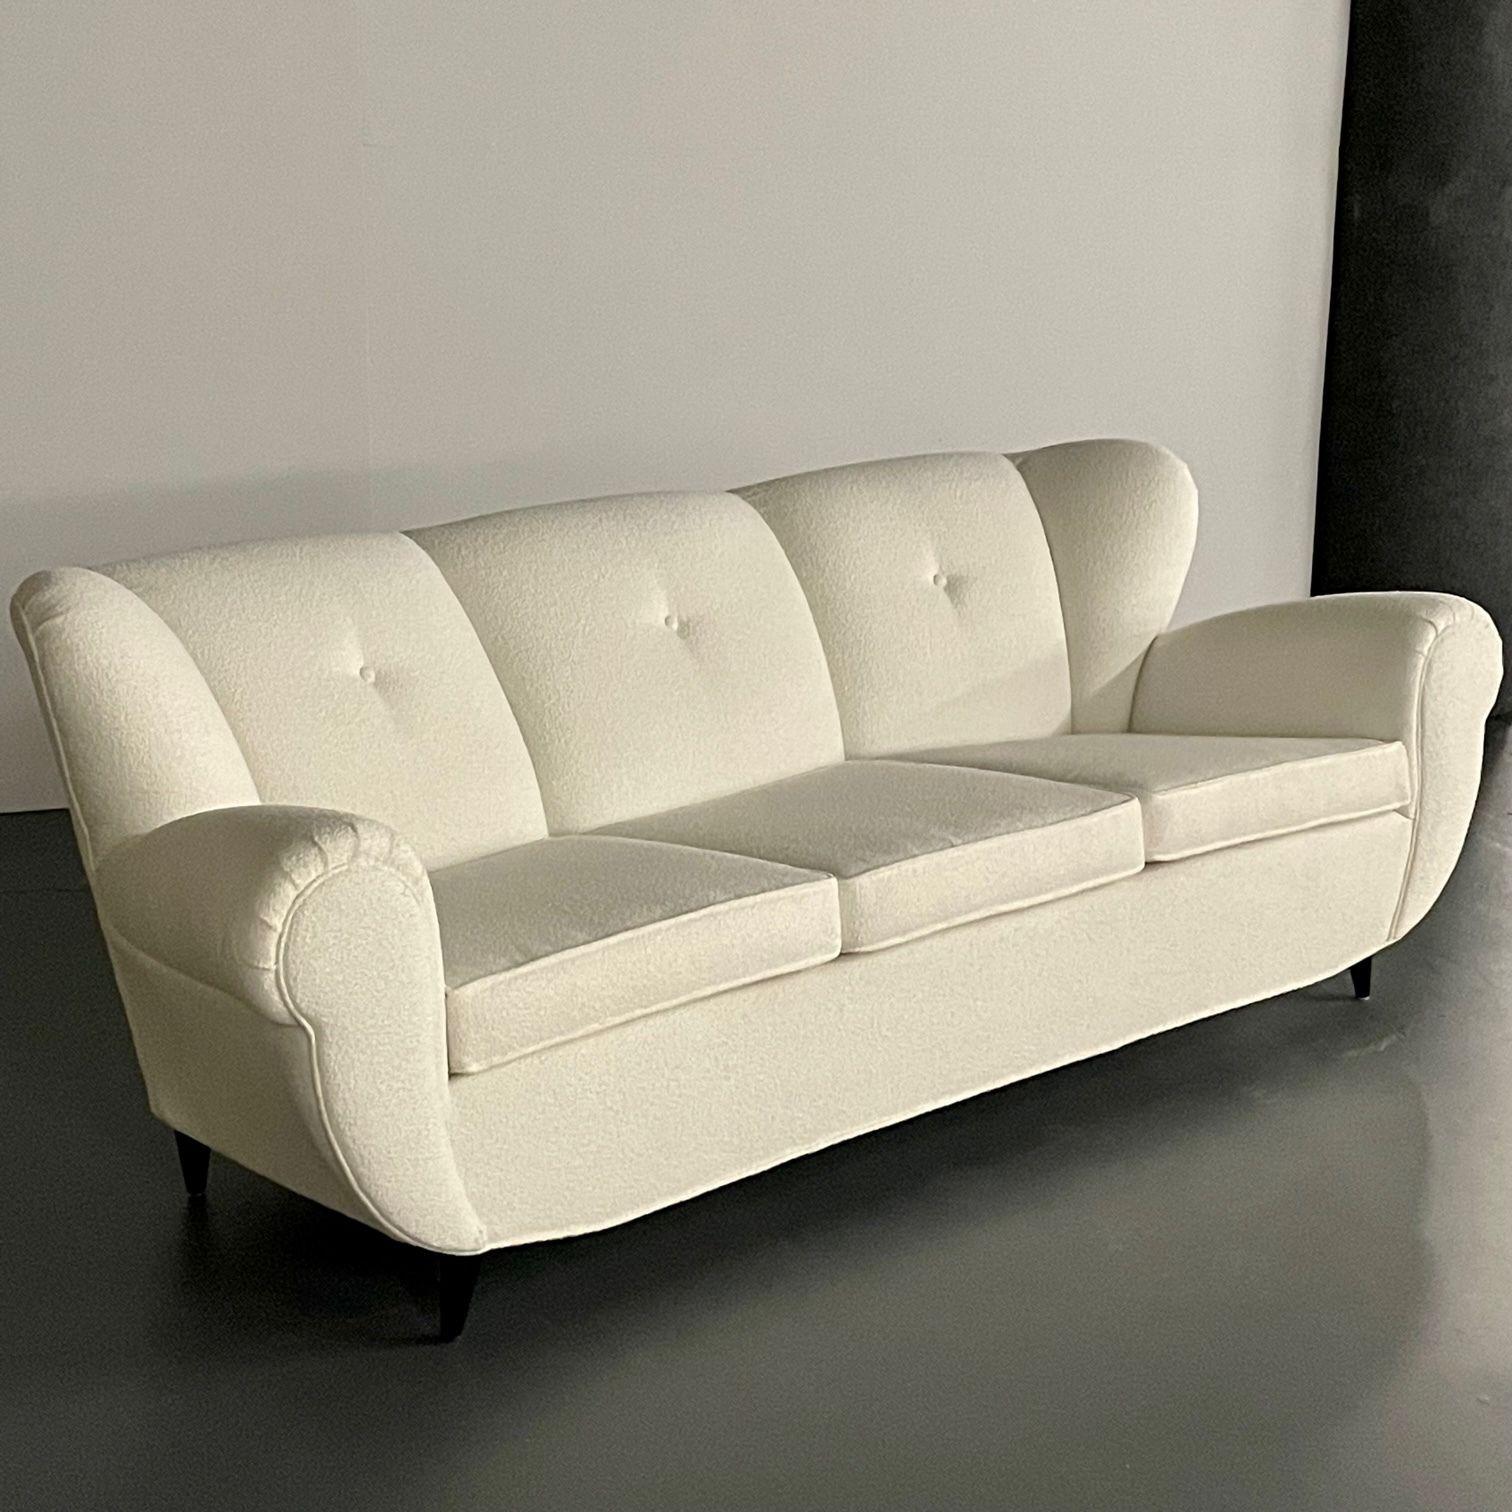 Mid-Century Modern Italian Sofa by Guglielmo Ulrich, Art Deco Style, Boucle, 1940s

Italian organic form sofa or settee by architect, designer and painter, Guglielmo Ulrich. The upper comprised of a premium nubby white boucle sitting on four low